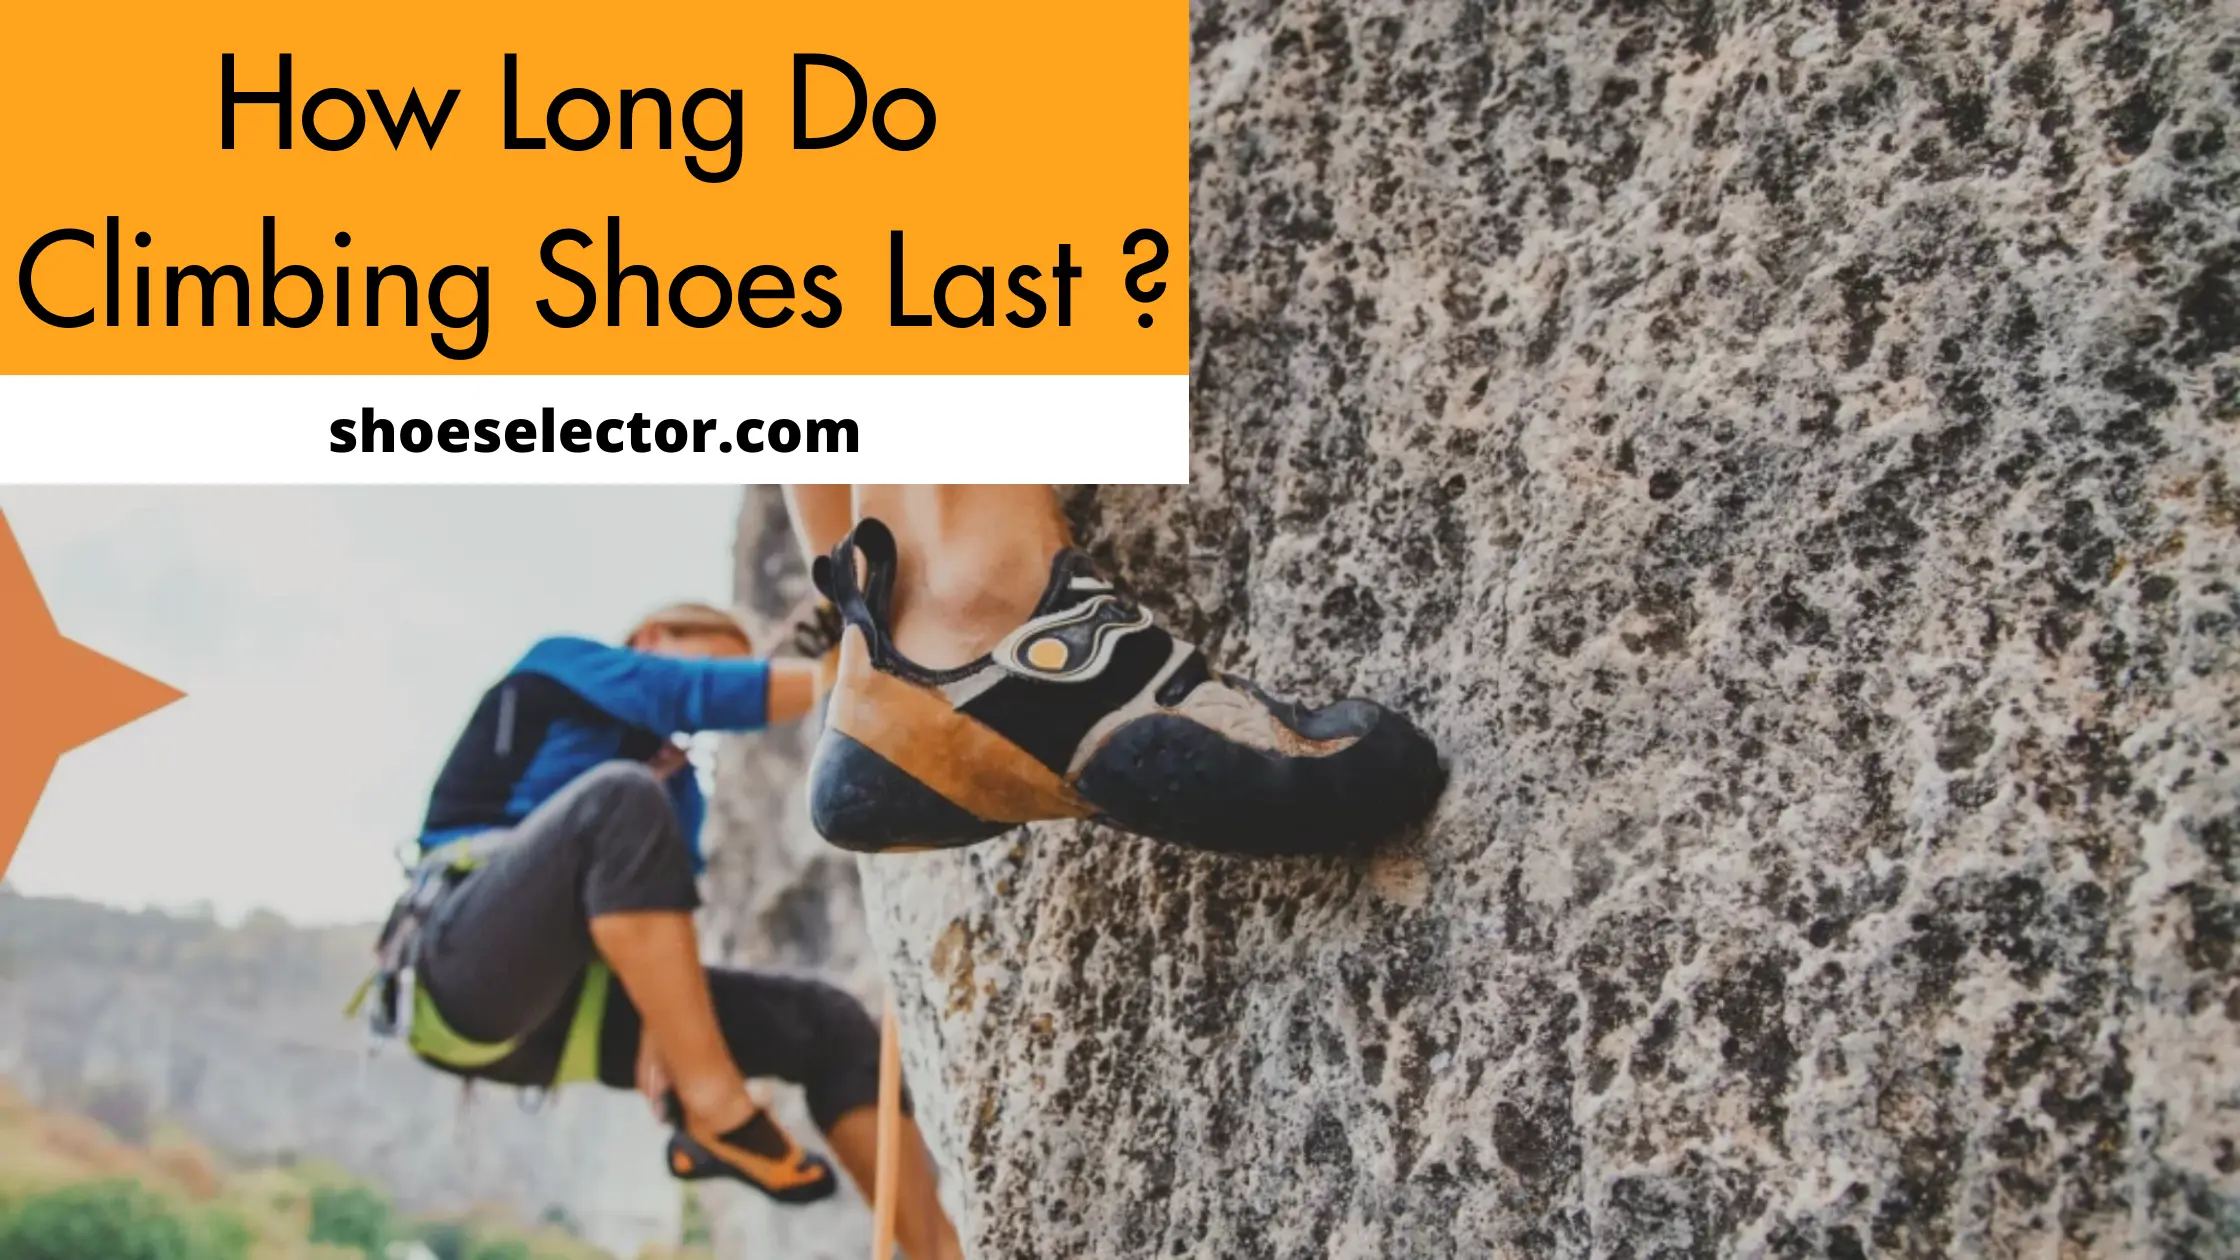 How Long Do Climbing Shoes Last? - Quick Guide